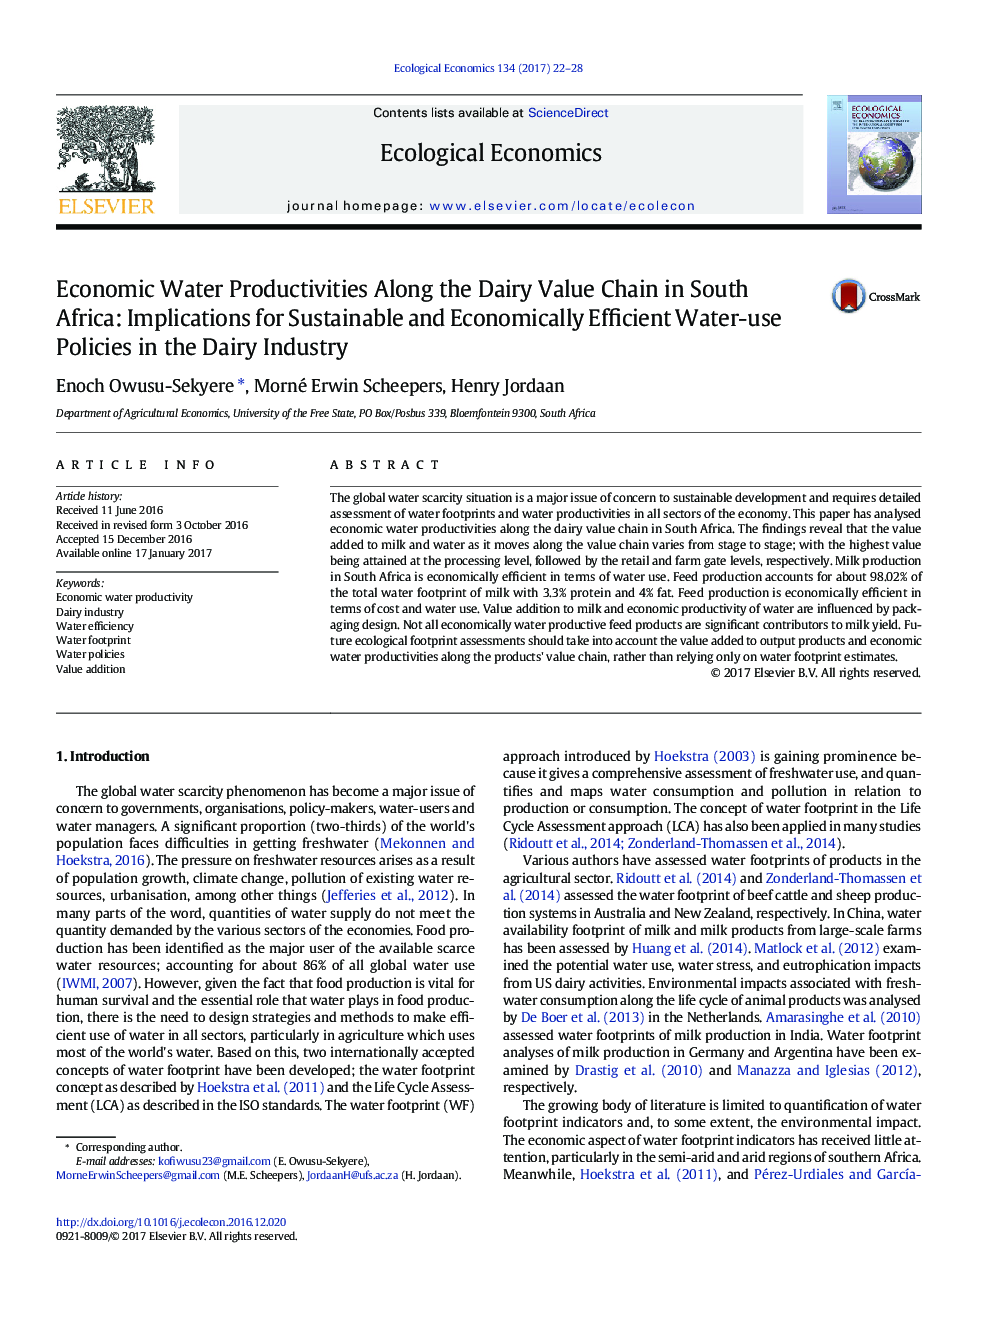 Economic Water Productivities Along the Dairy Value Chain in South Africa: Implications for Sustainable and Economically Efficient Water-use Policies in the Dairy Industry